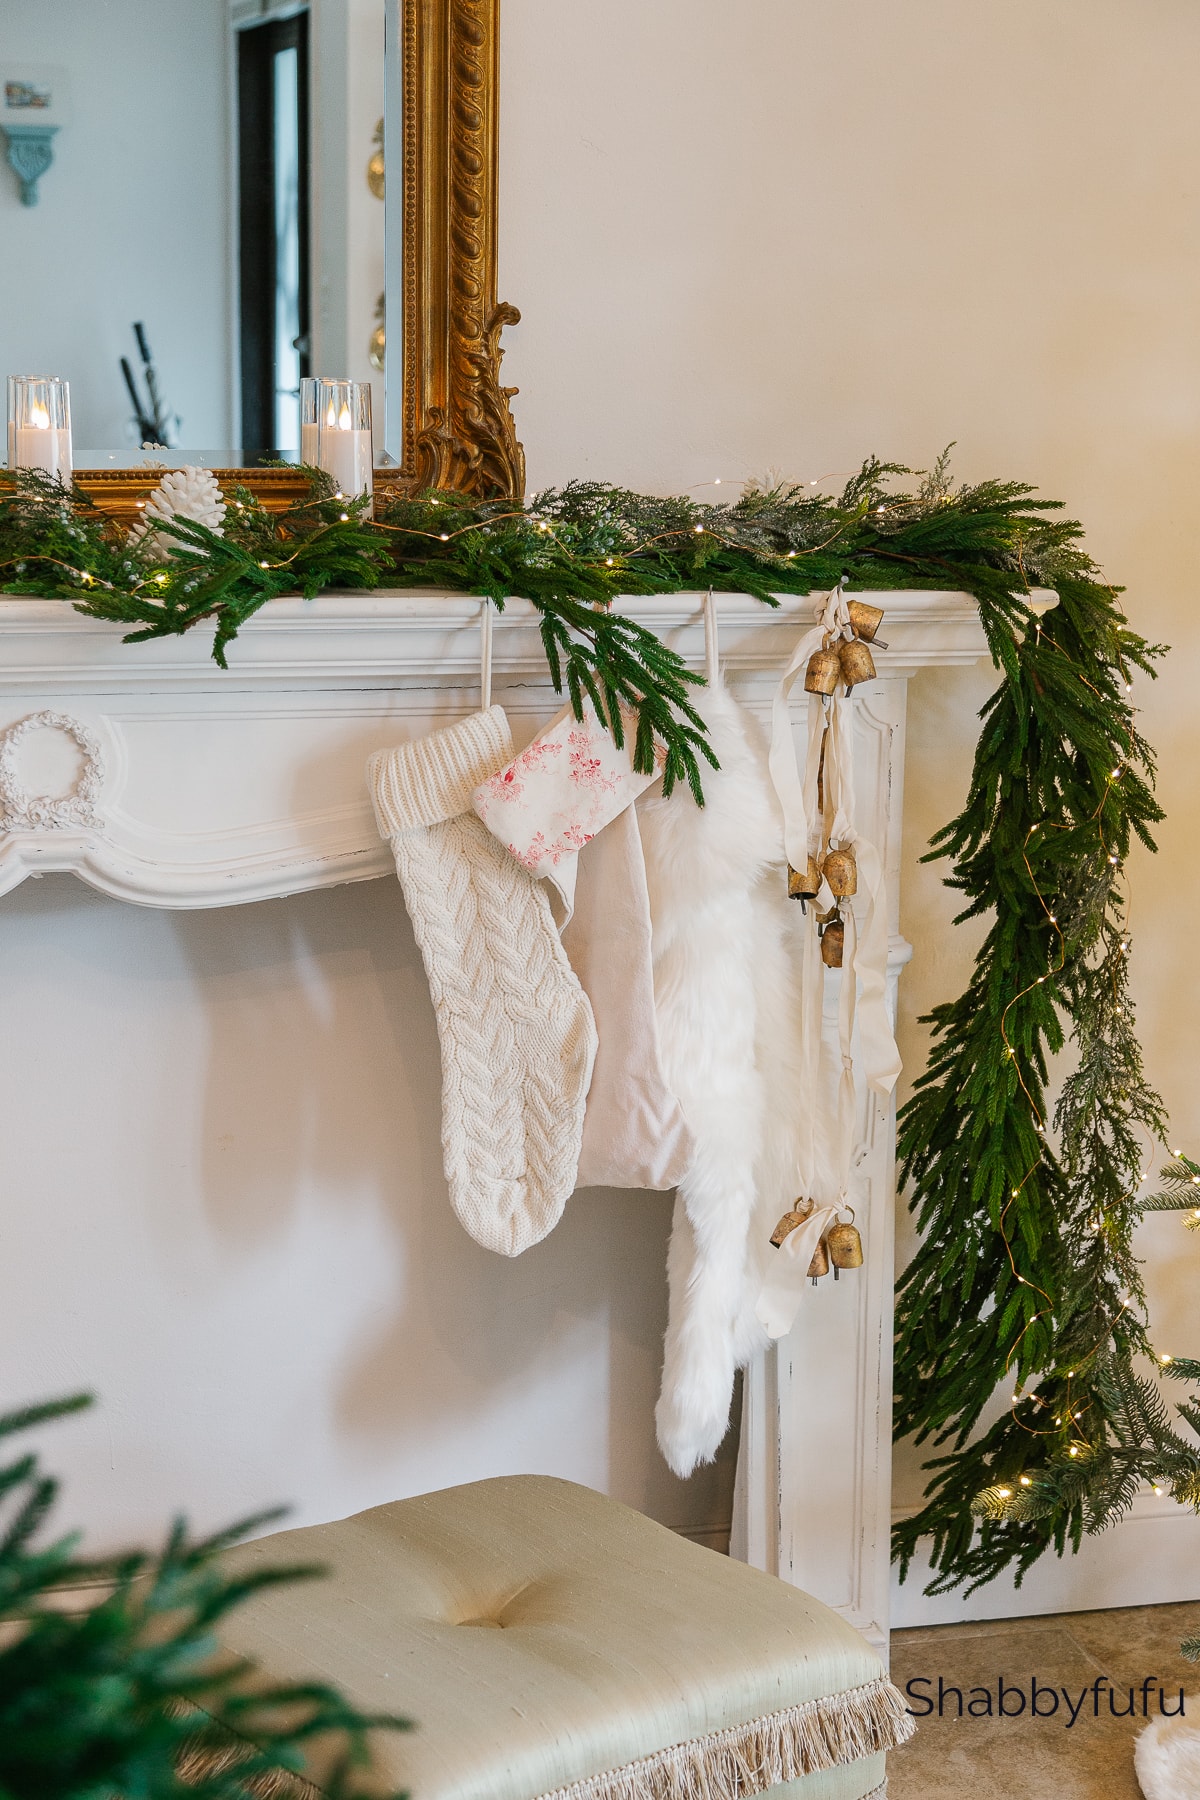 Decorate for Christmas French country style